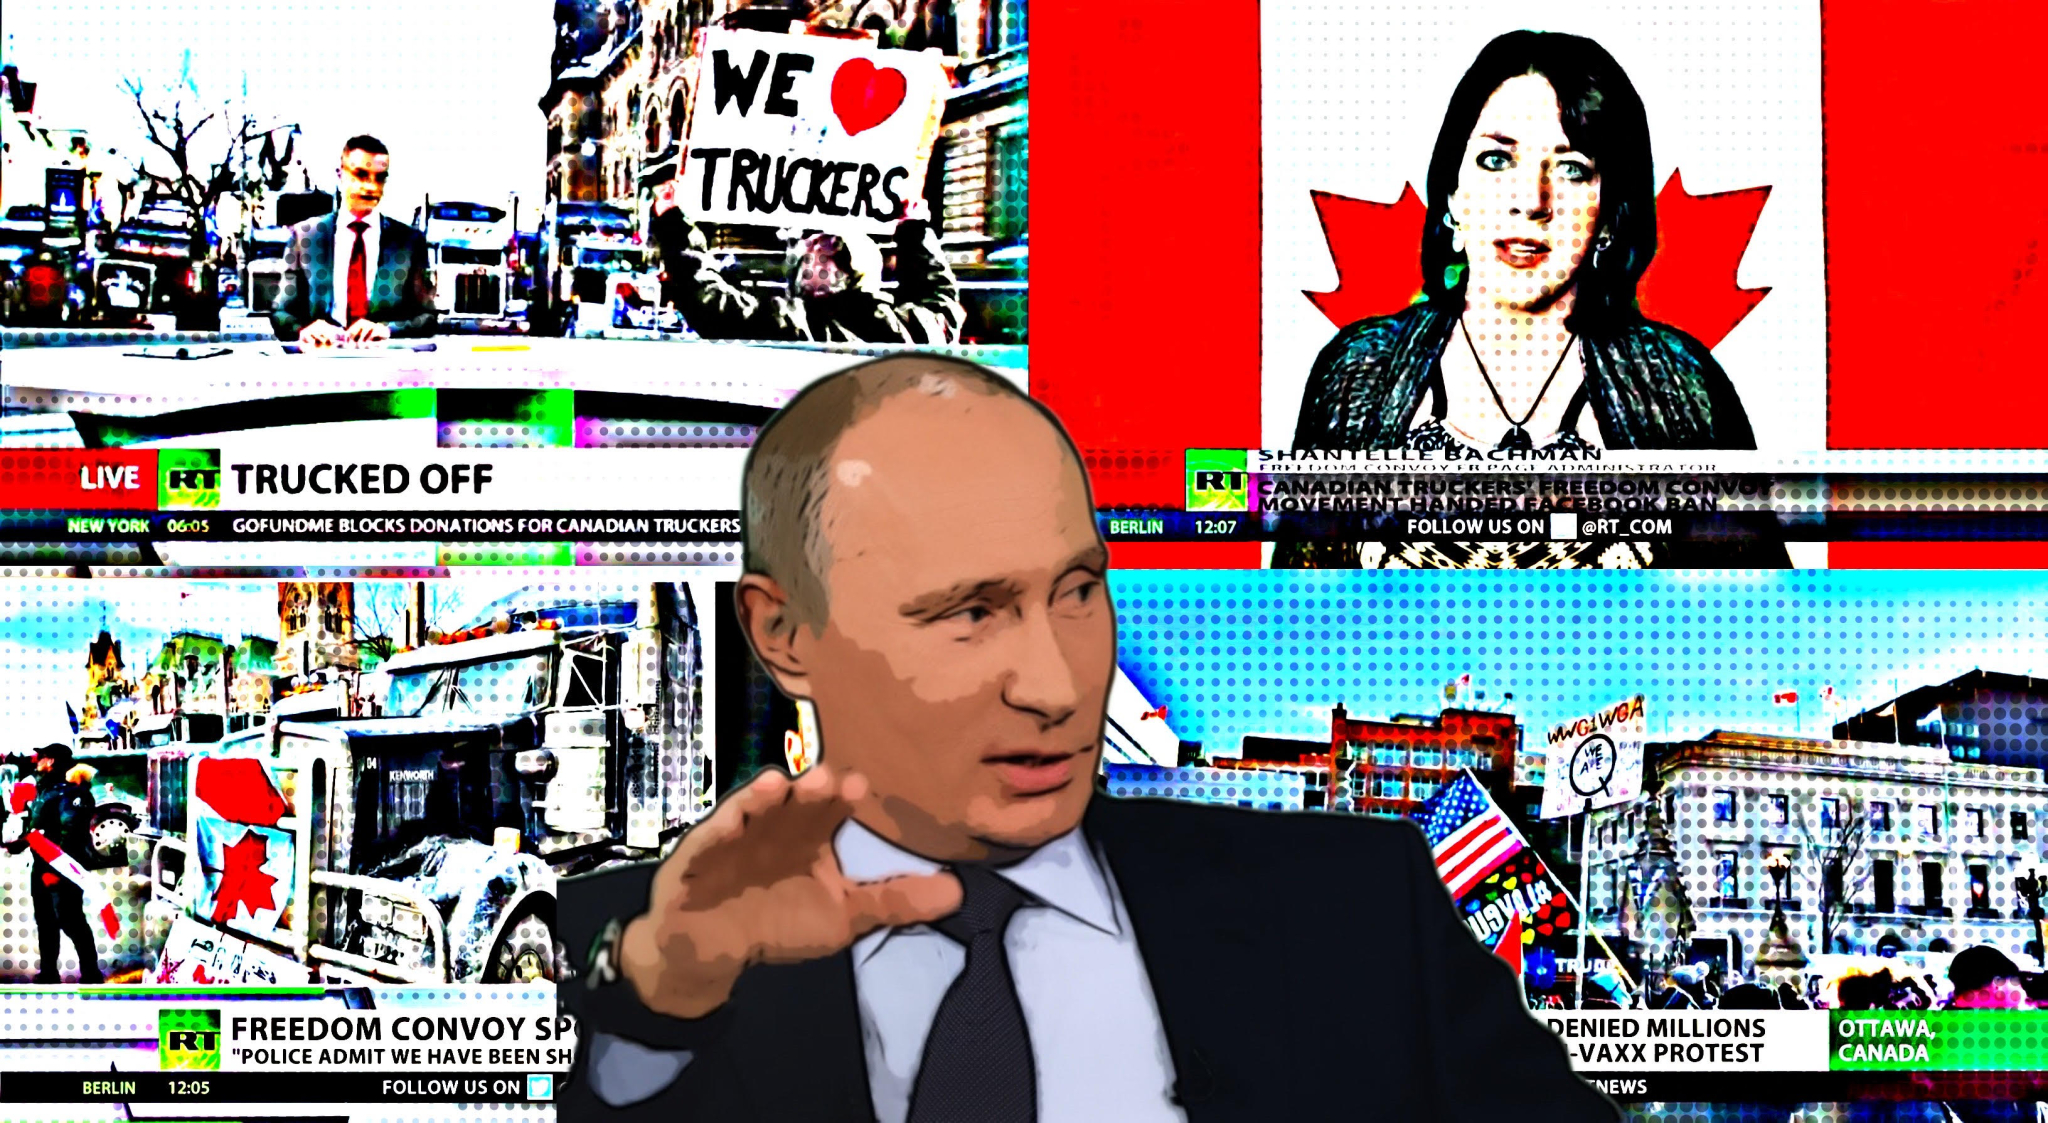 Russia used state-funded propaganda outlet to whip up support for the ‘Freedom Convoy’ and undermine the Trudeau government